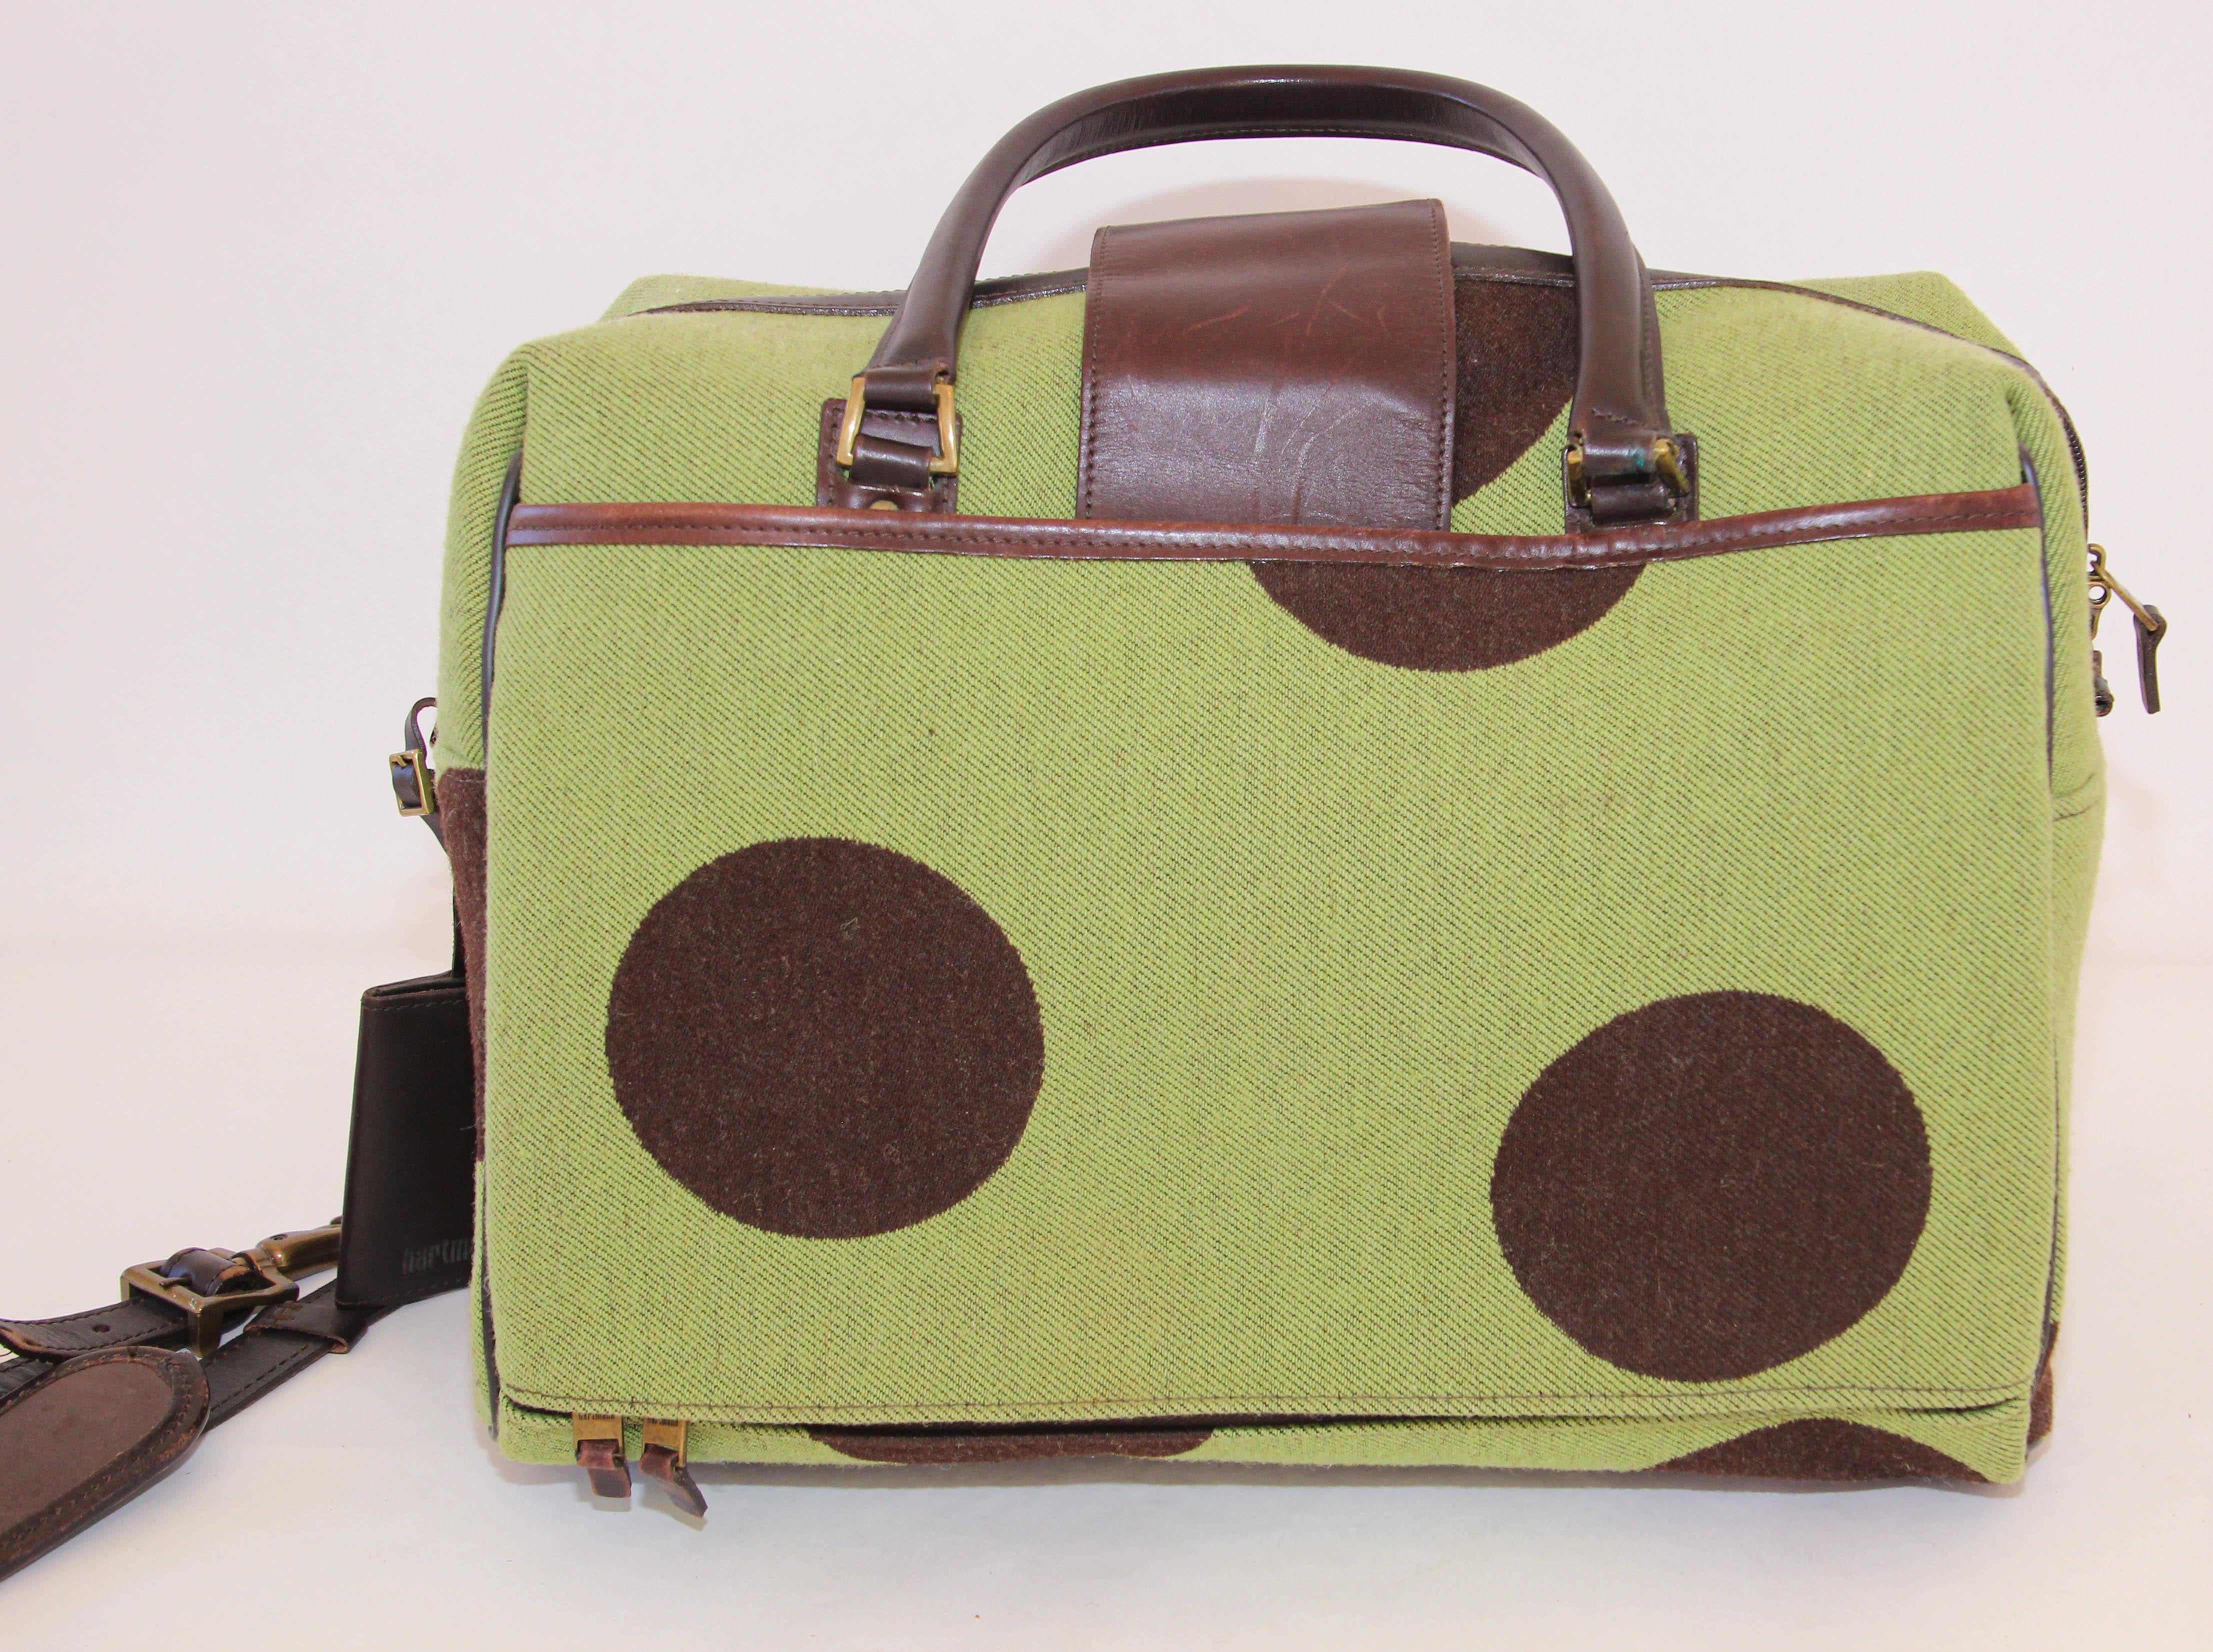 Hartmann Retro Carry-On in Apple Green with Polka Dot In Good Condition For Sale In North Hollywood, CA